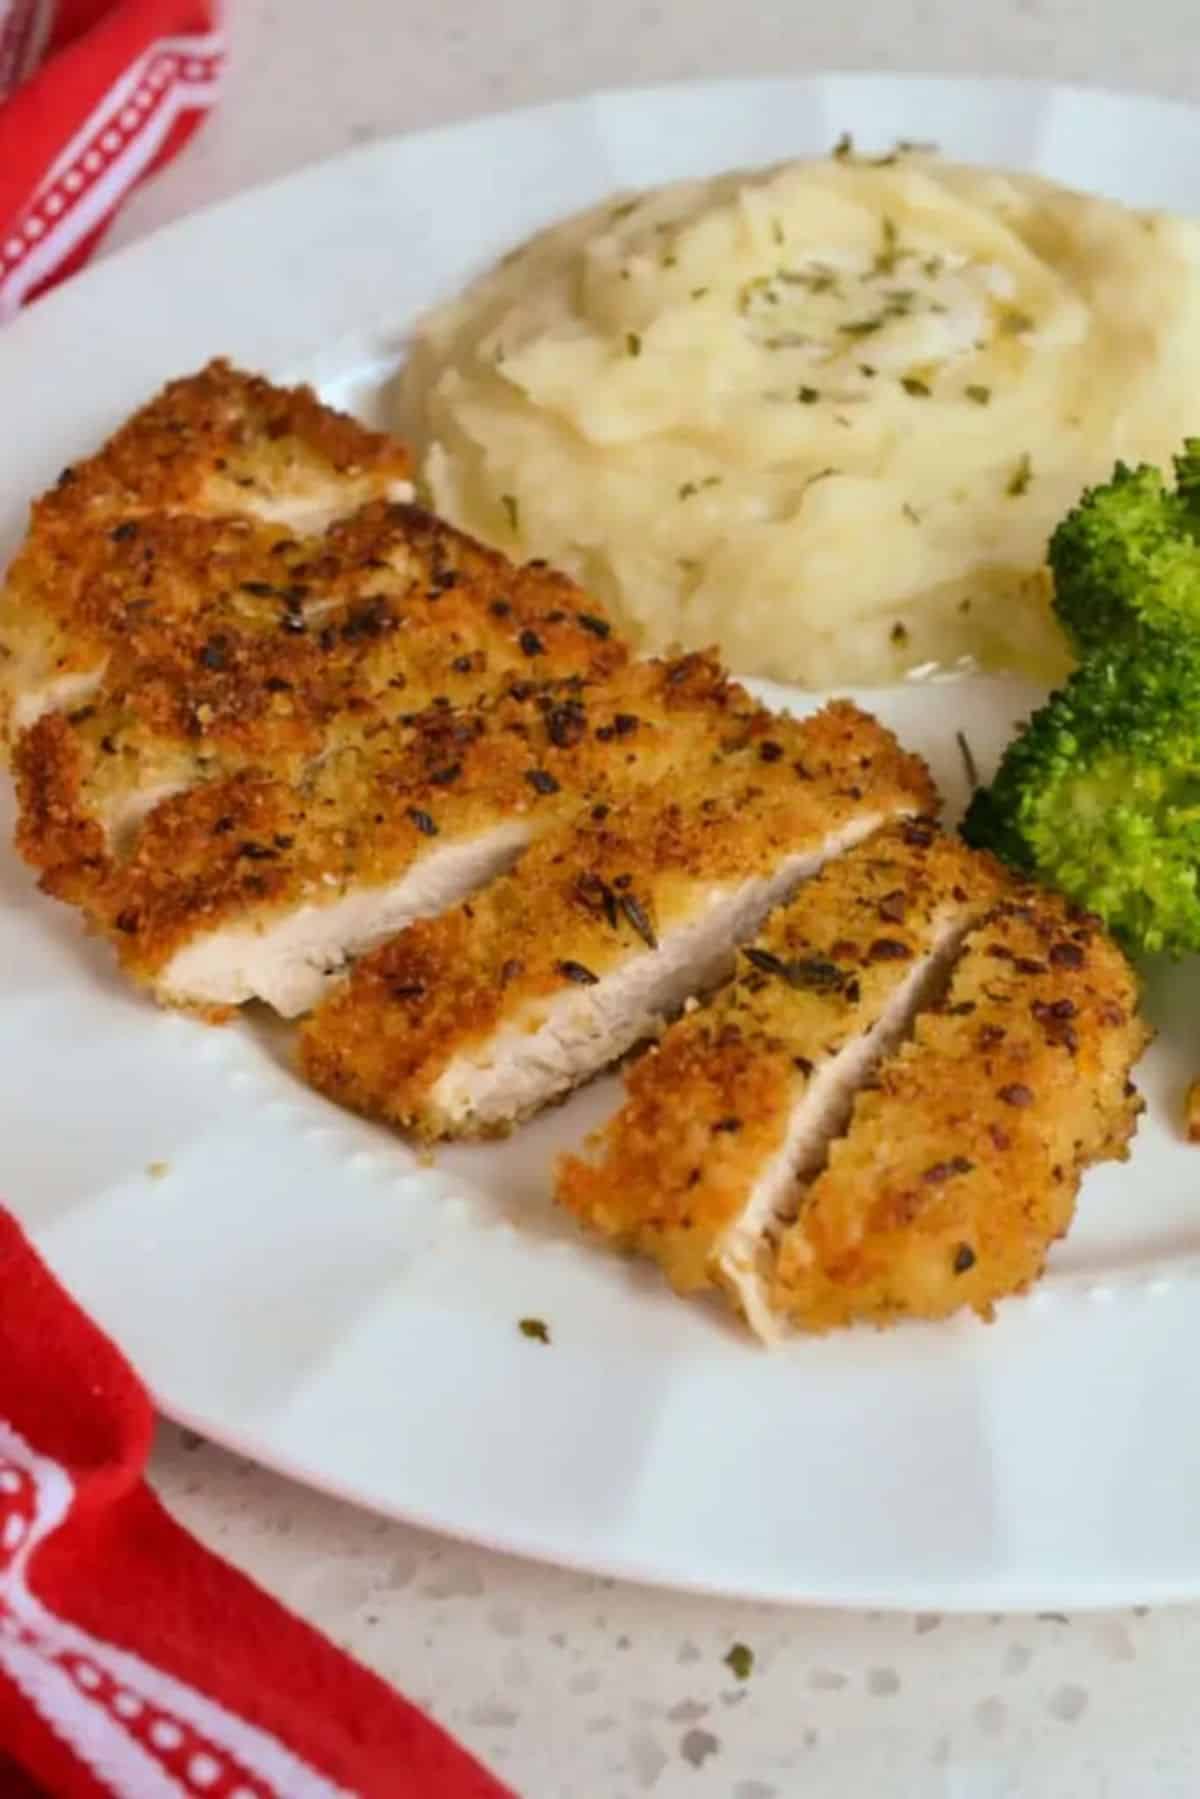 Delicious parmesan crusted chicken with mashed potatoes and broccoli on a white plate.